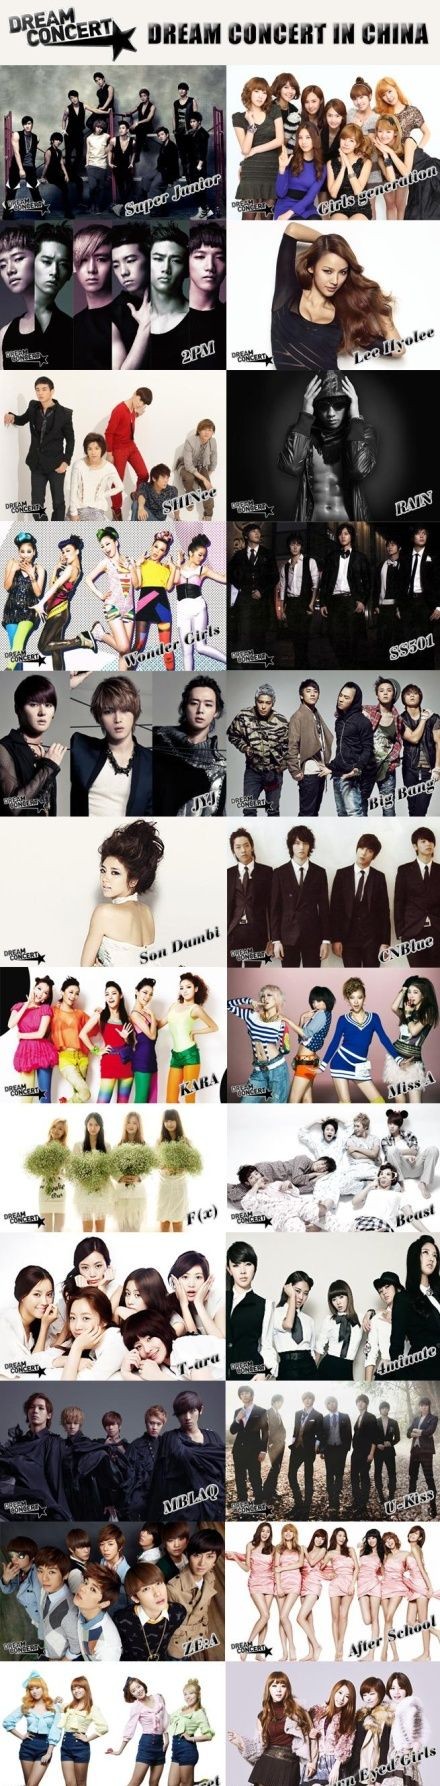 Who Will Attend the Dream Concert 2011? « Shining Blue ミ